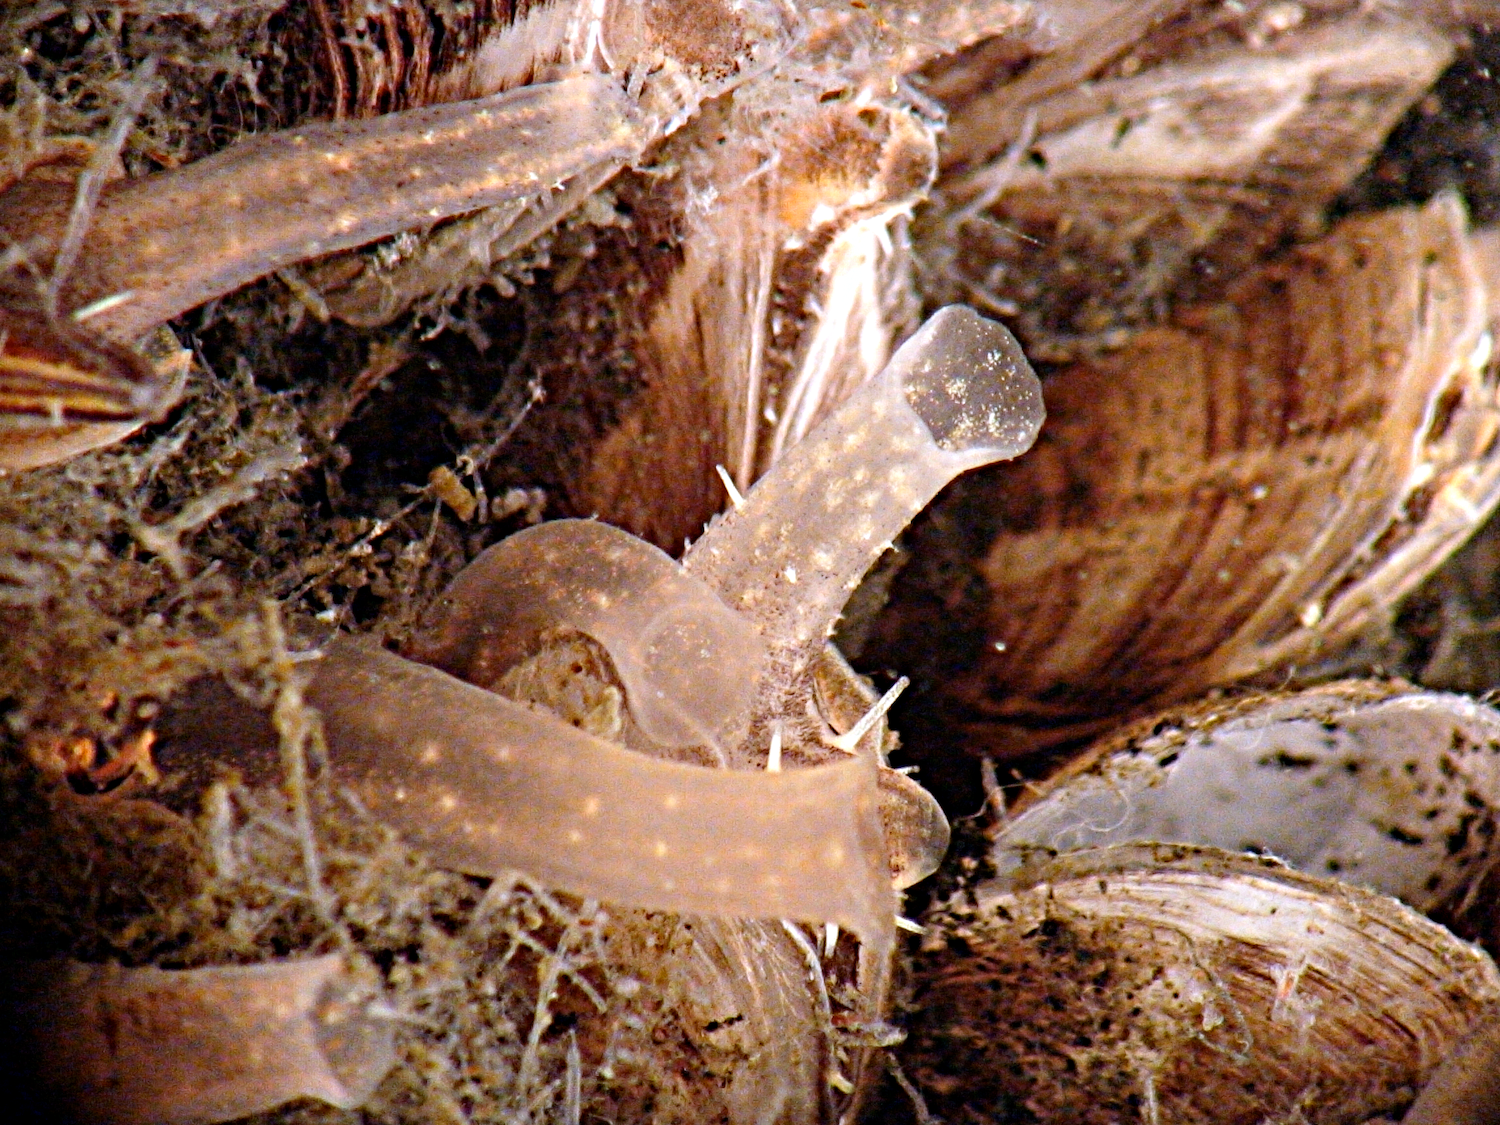 tube-like siphons protruding from several mussels in view.